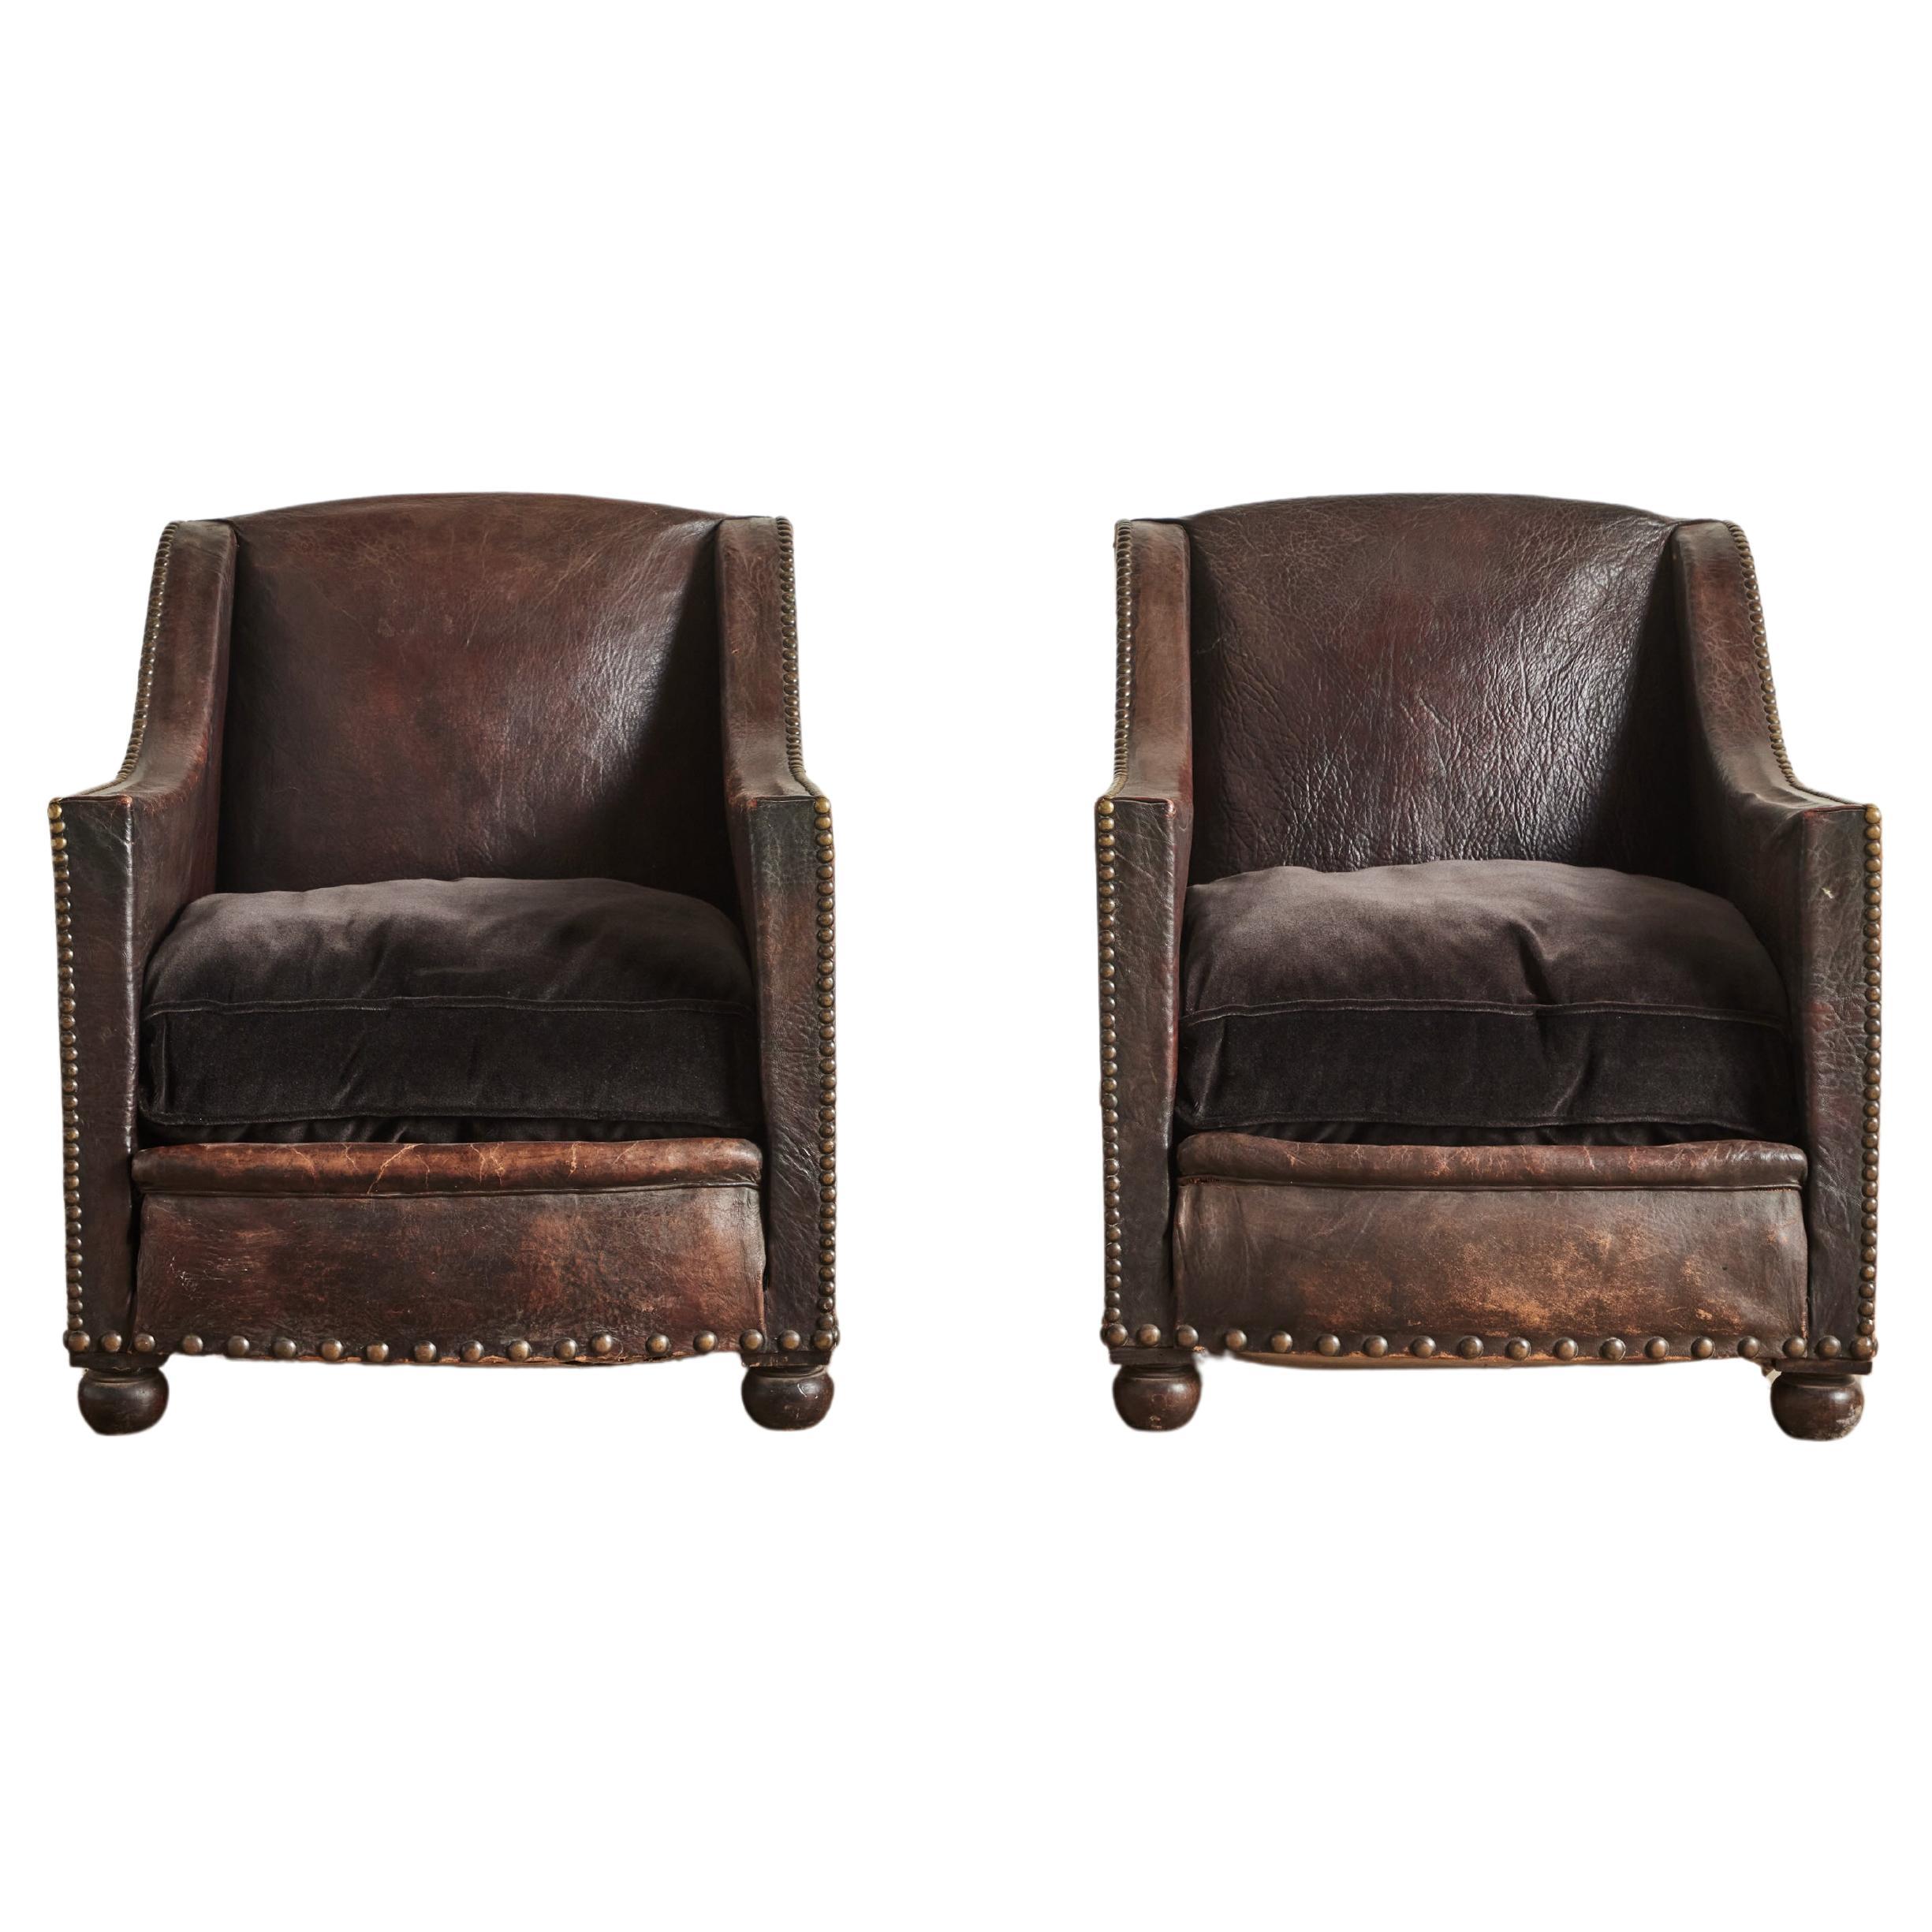 Pair of Buffalo Leather Club Chairs